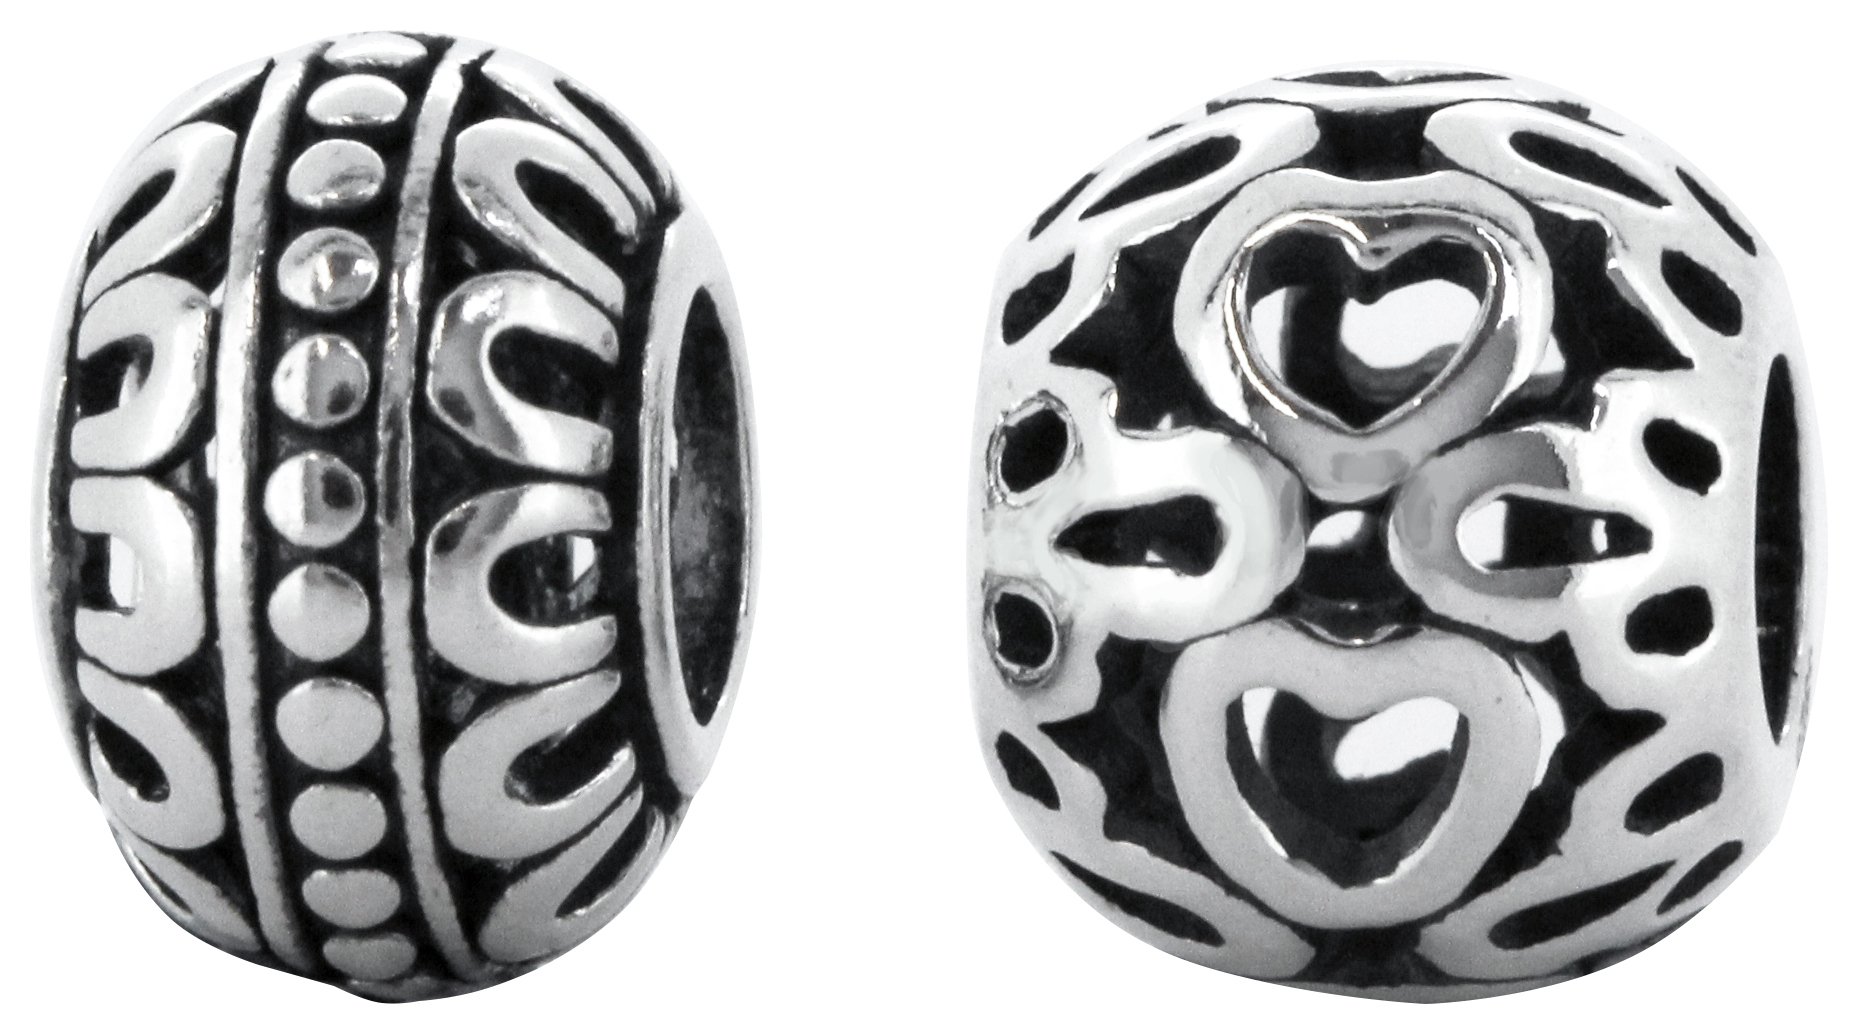 Link Up Sterling Silver Filigree Round Beads - Set of 2